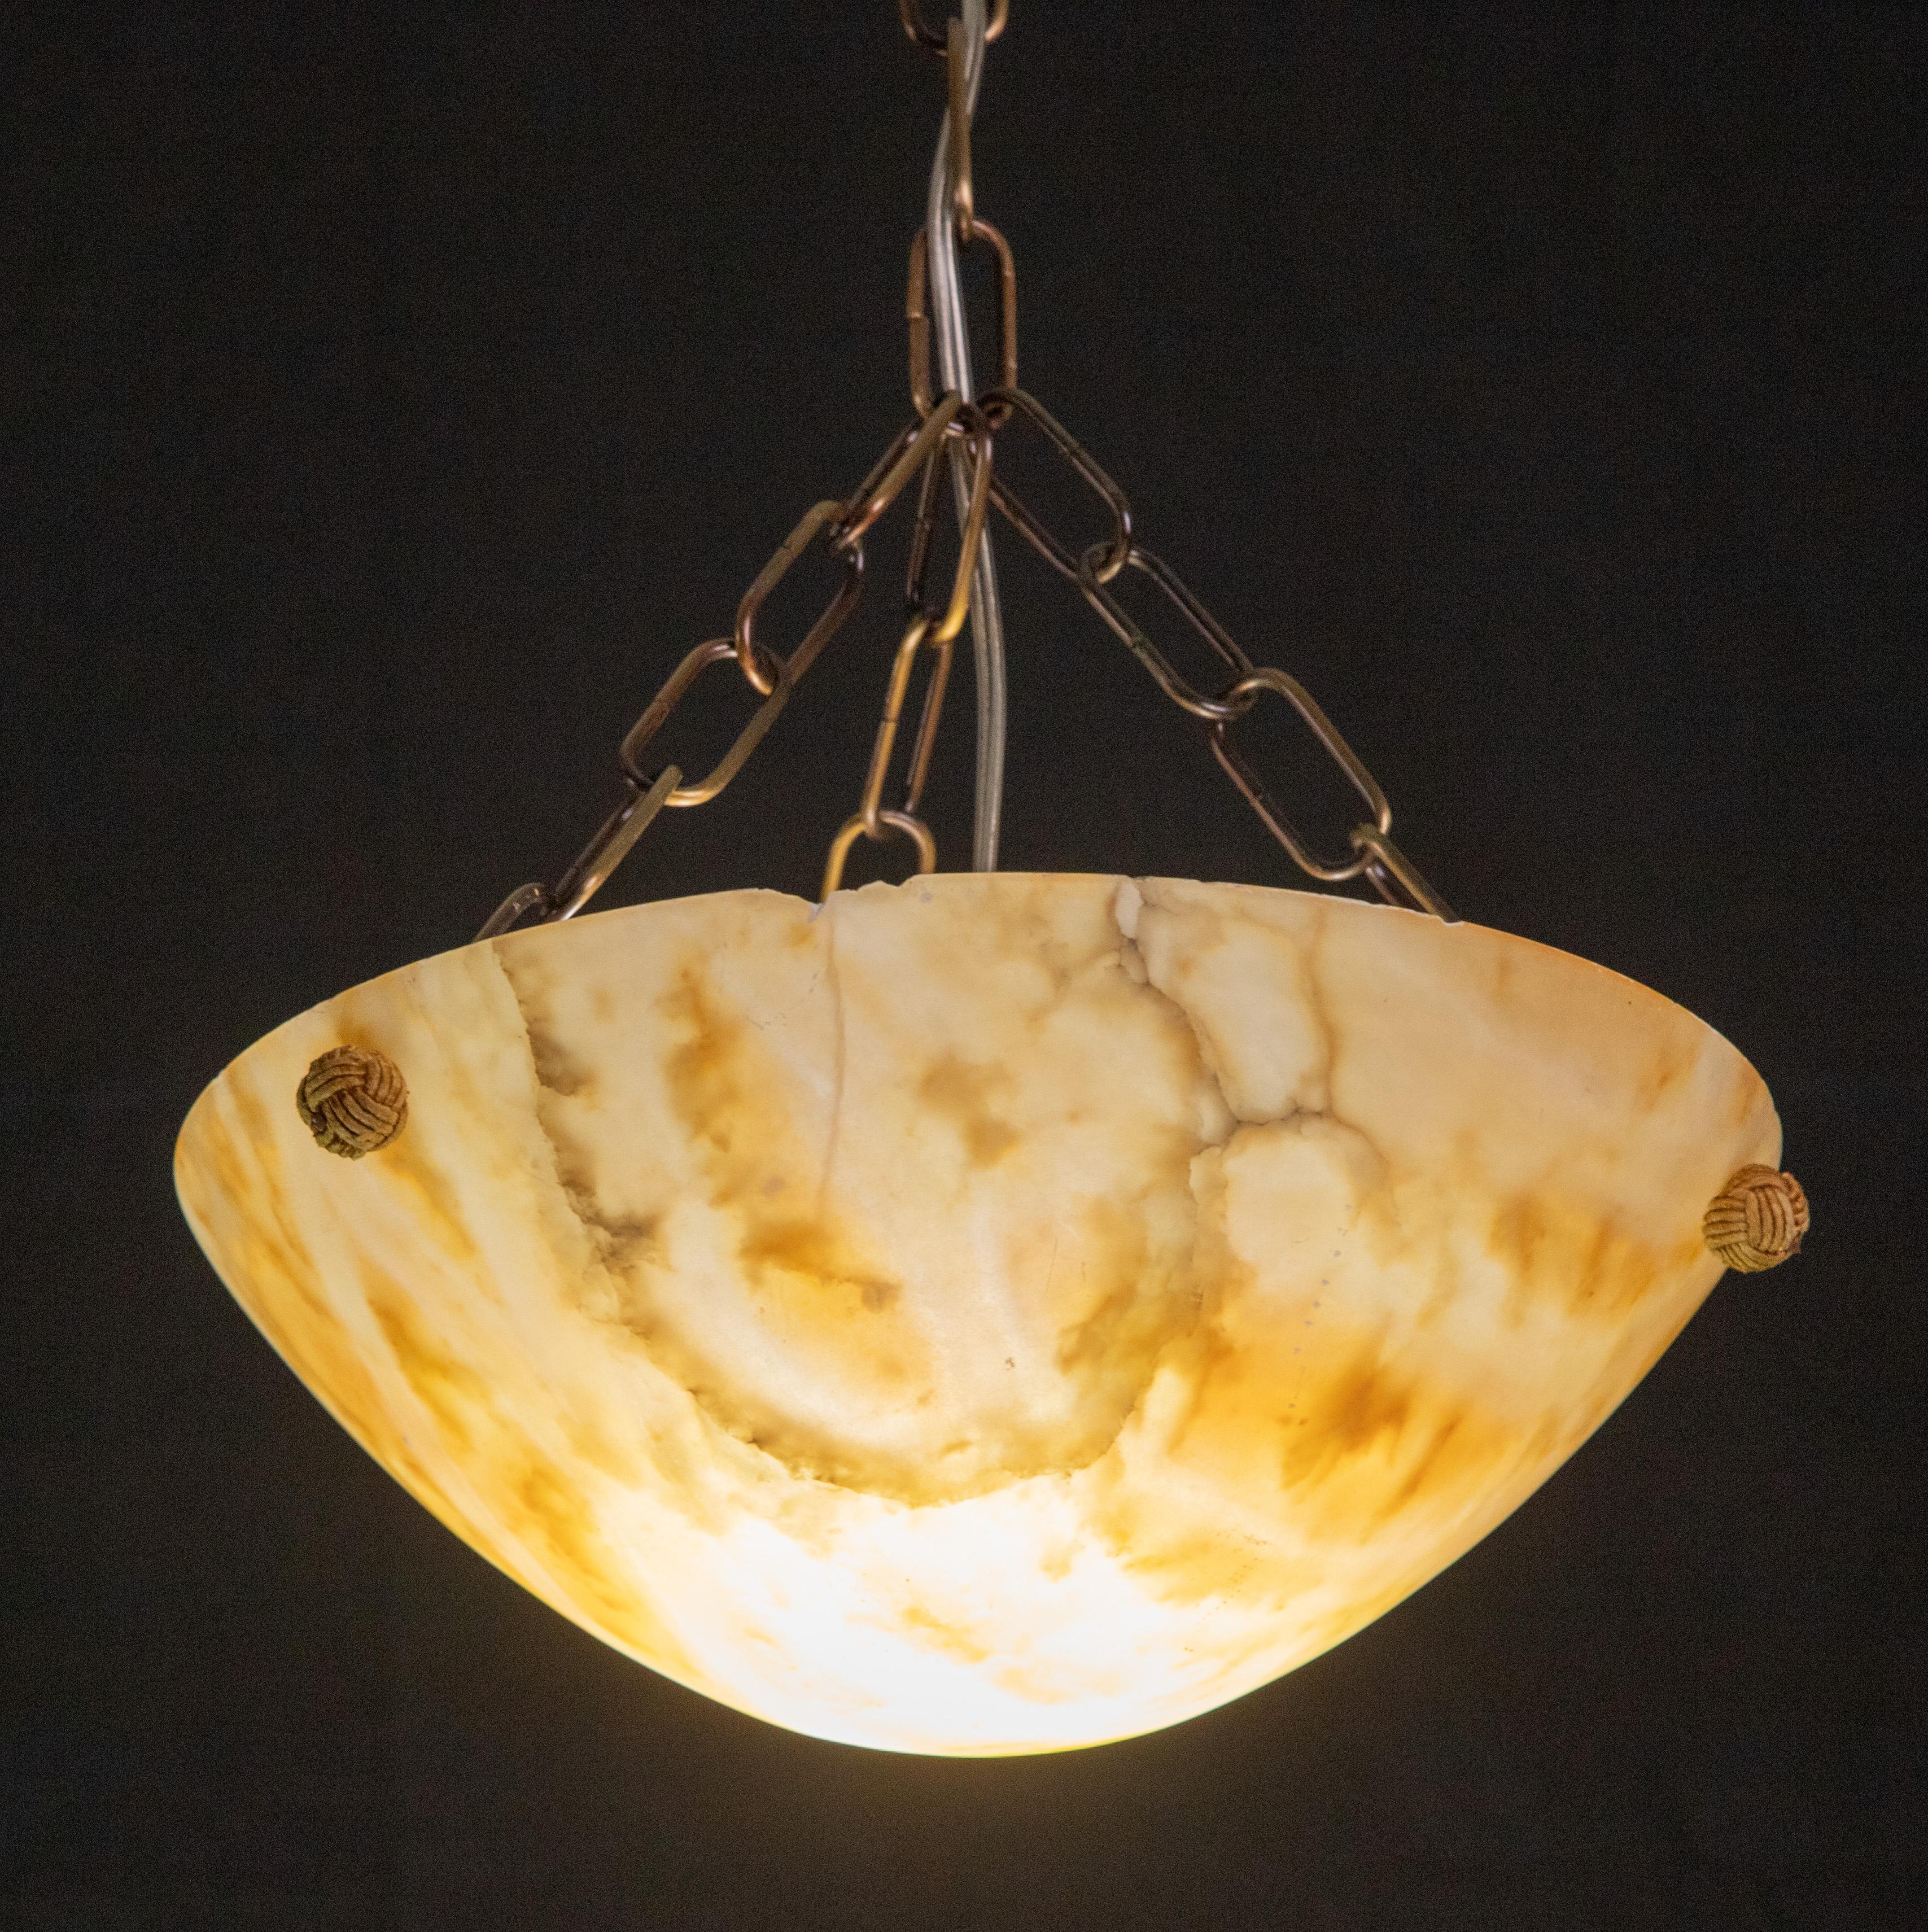 Alabaster chandelier orange color.

Period circa 1940.

The chandelier is 80 centimeters high, the diameter measures 30 centimeters.

The stone is completely original, the chain has been replaced and is new, it can be shortened or lengthened upon